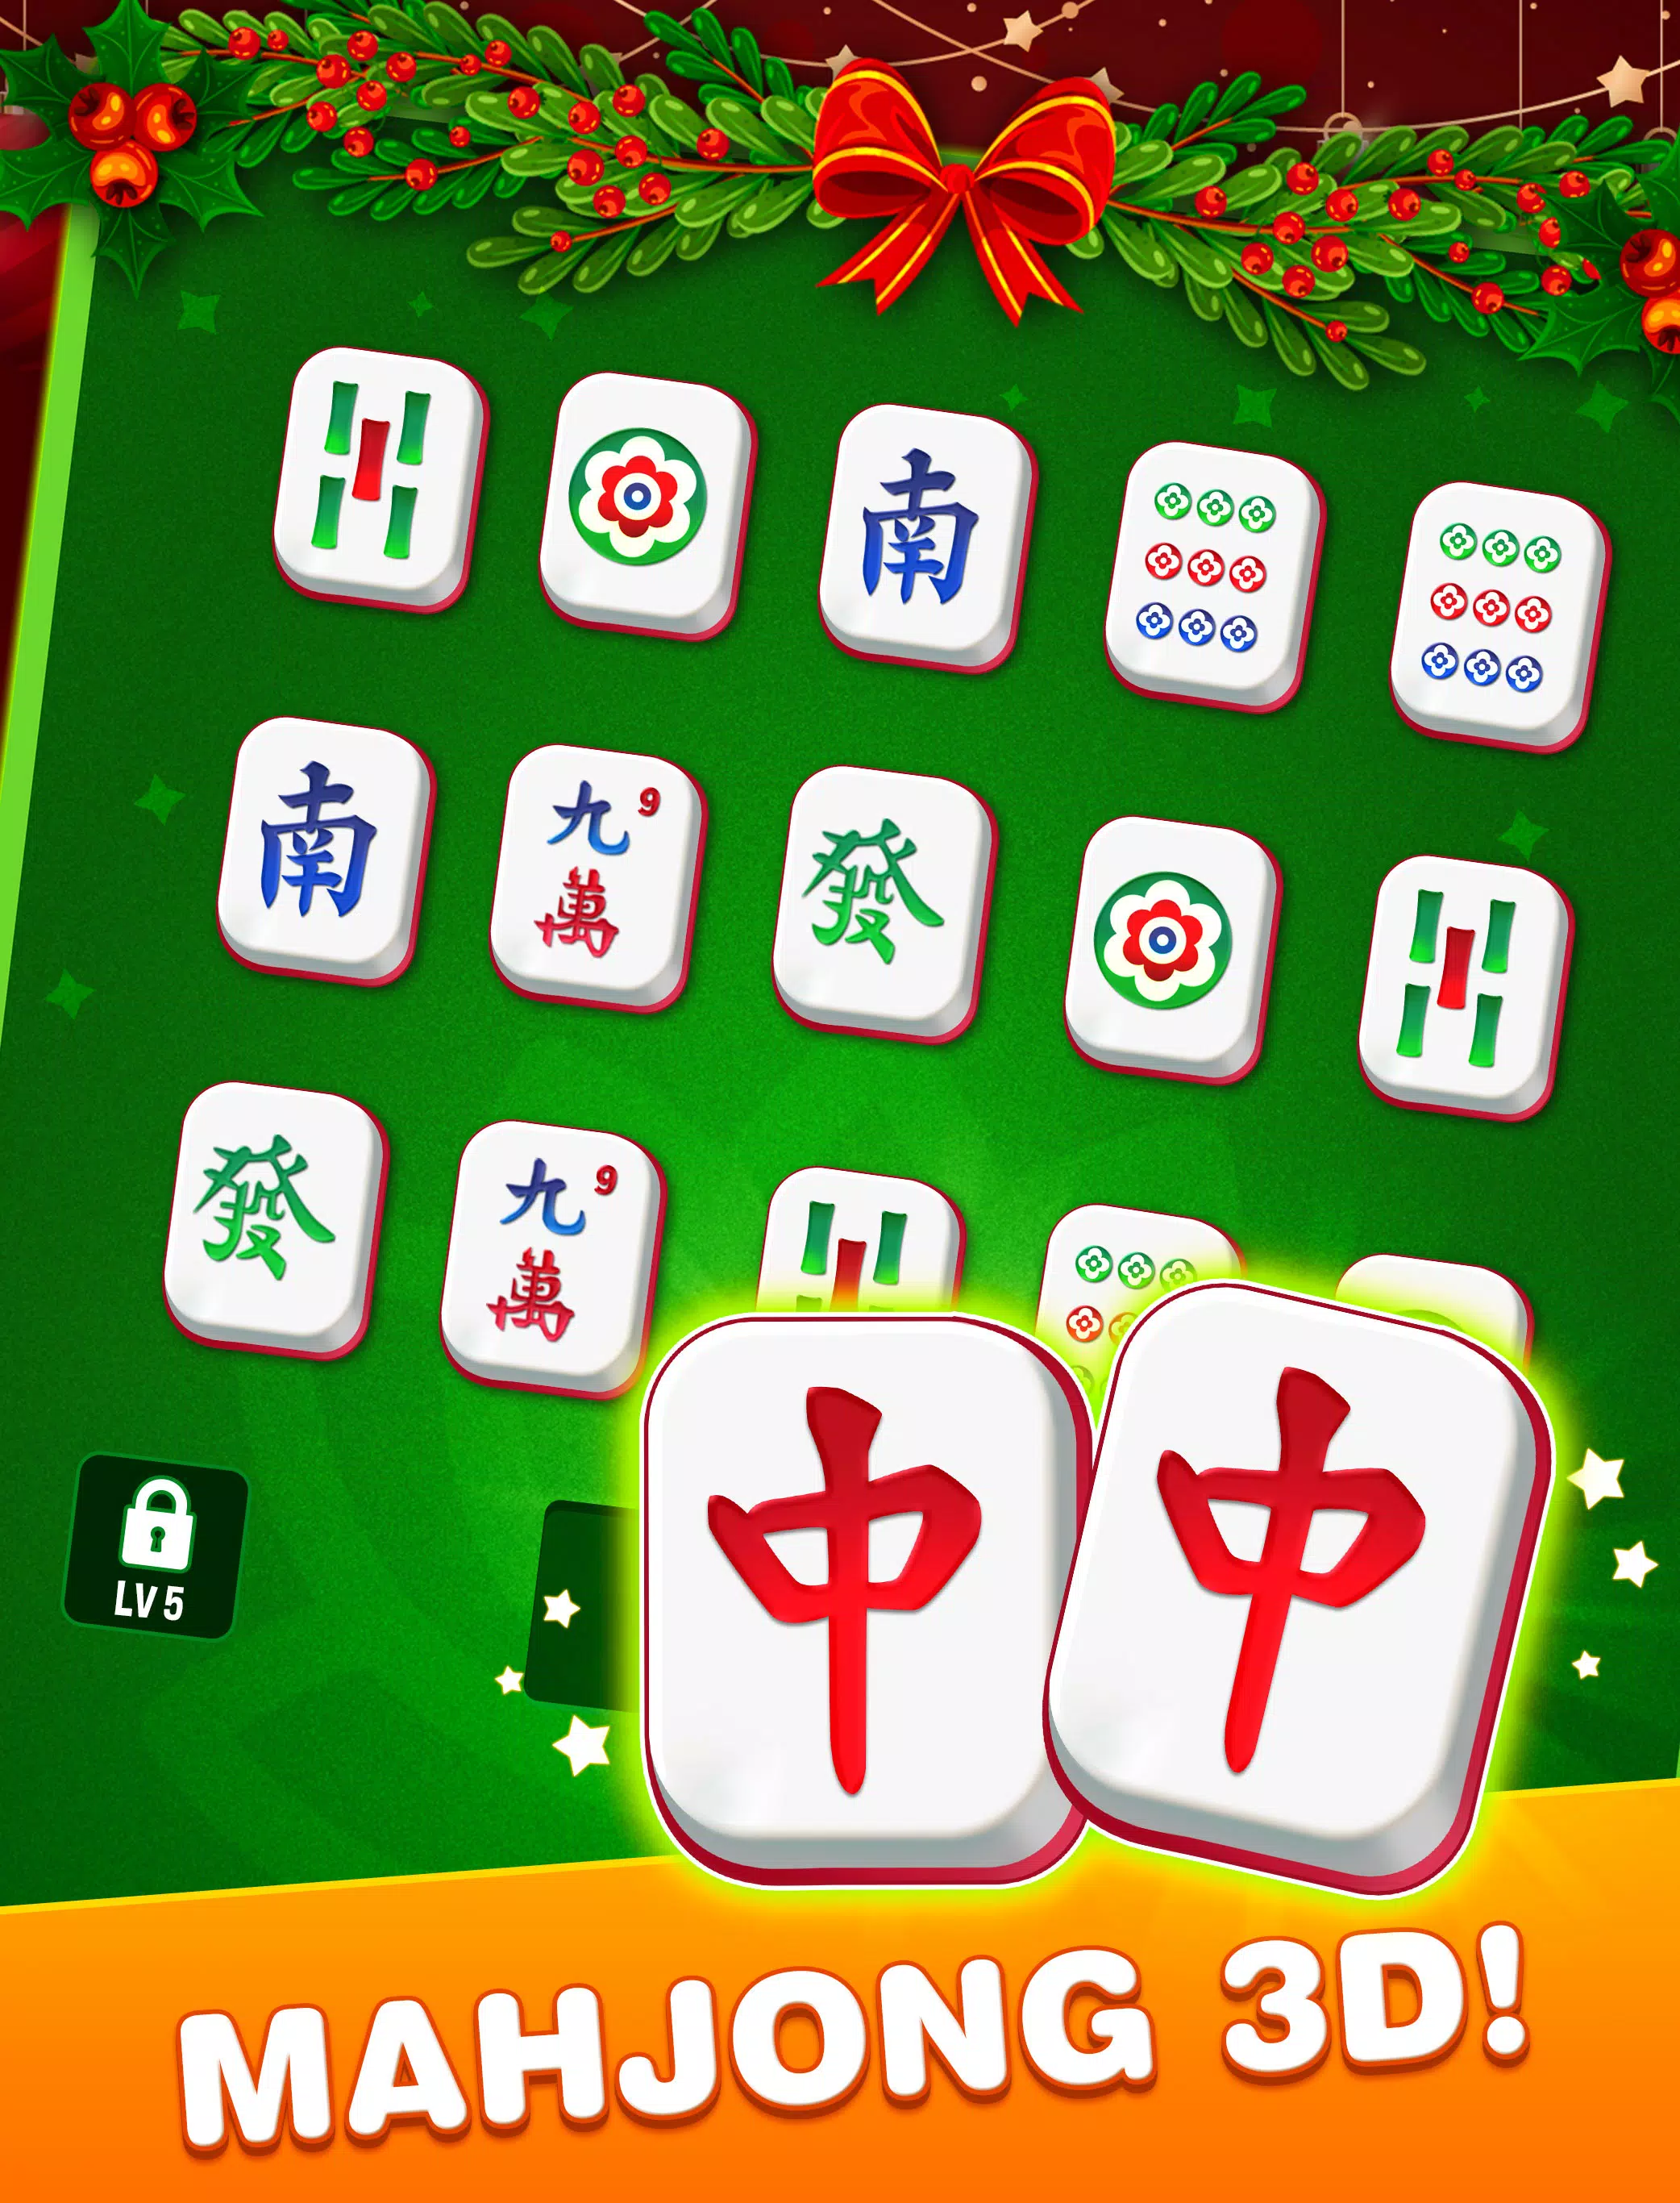 Mahjong 3D for Android - APK Download